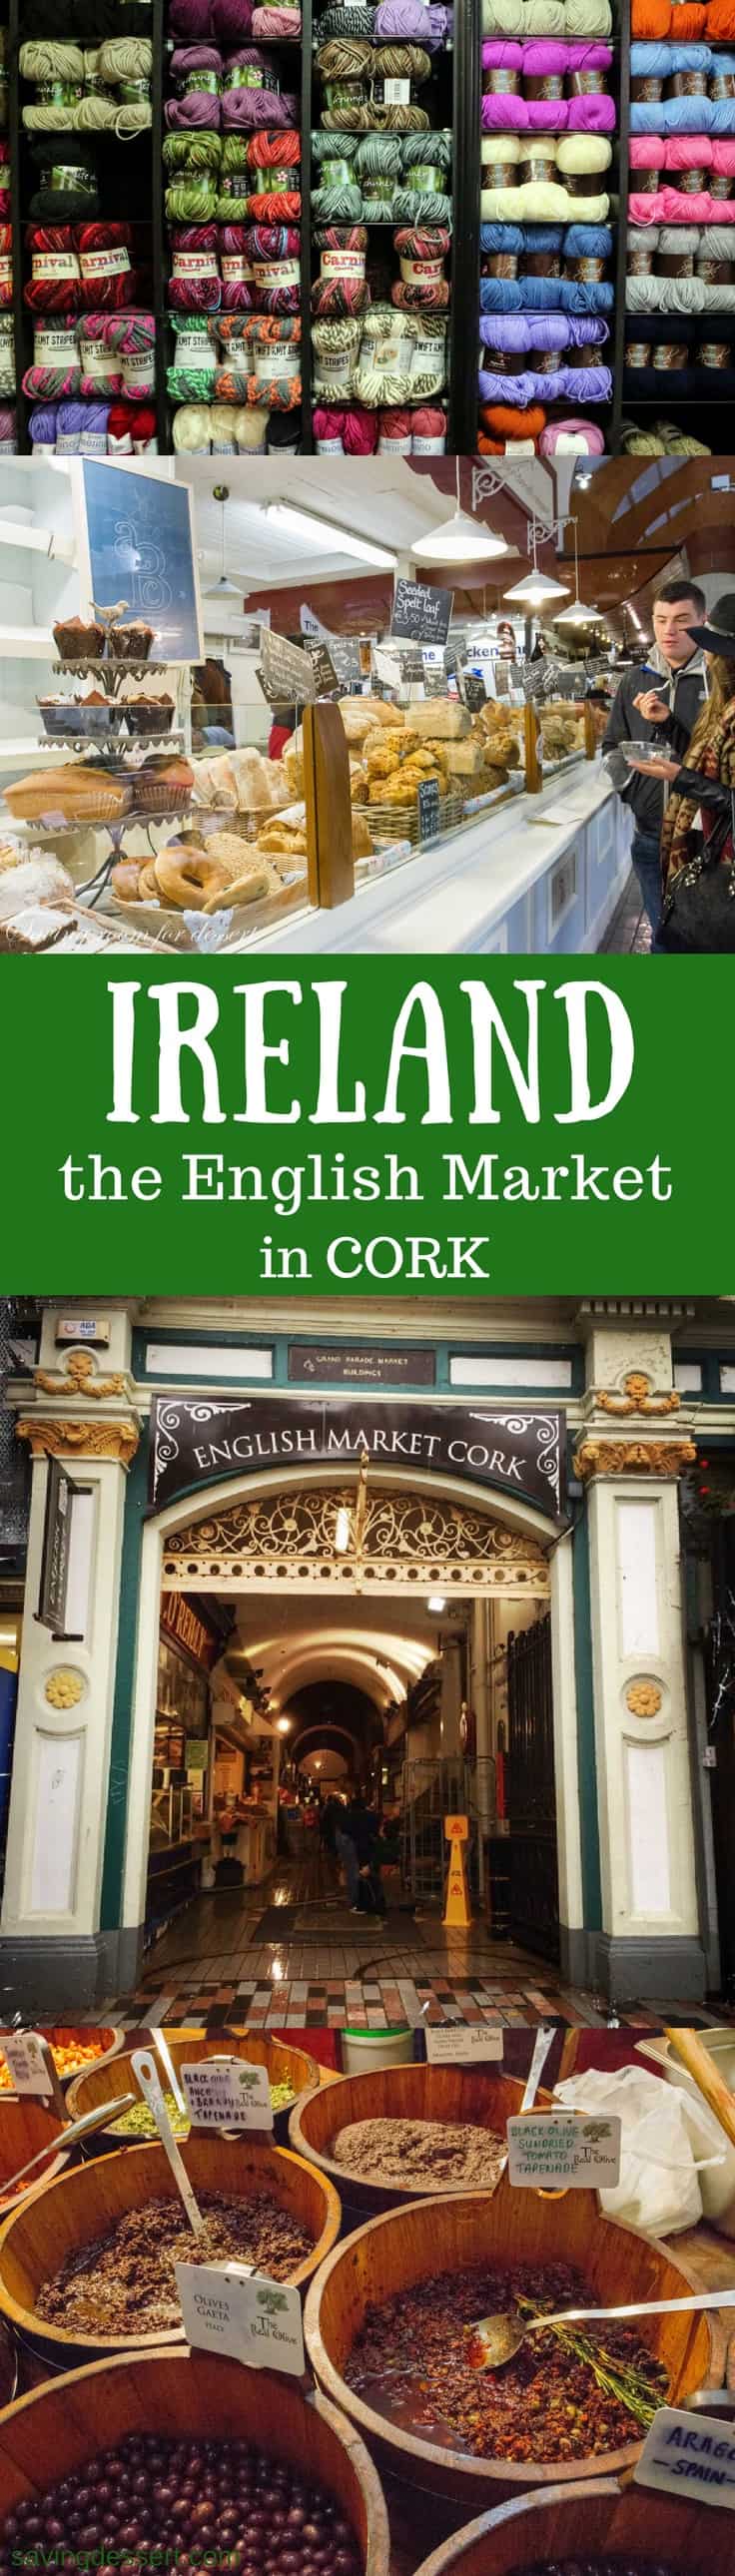 Cork Ireland - The Cork English Market has a fascinating history dating as far back as 1786.  That's before the United States had it's first president!  The market officially opened in August of 1788 and continues to thrive today. #savingroomfordessert #ireland #cork #theenglishmarketcork #market #travel www.savingdessert.com